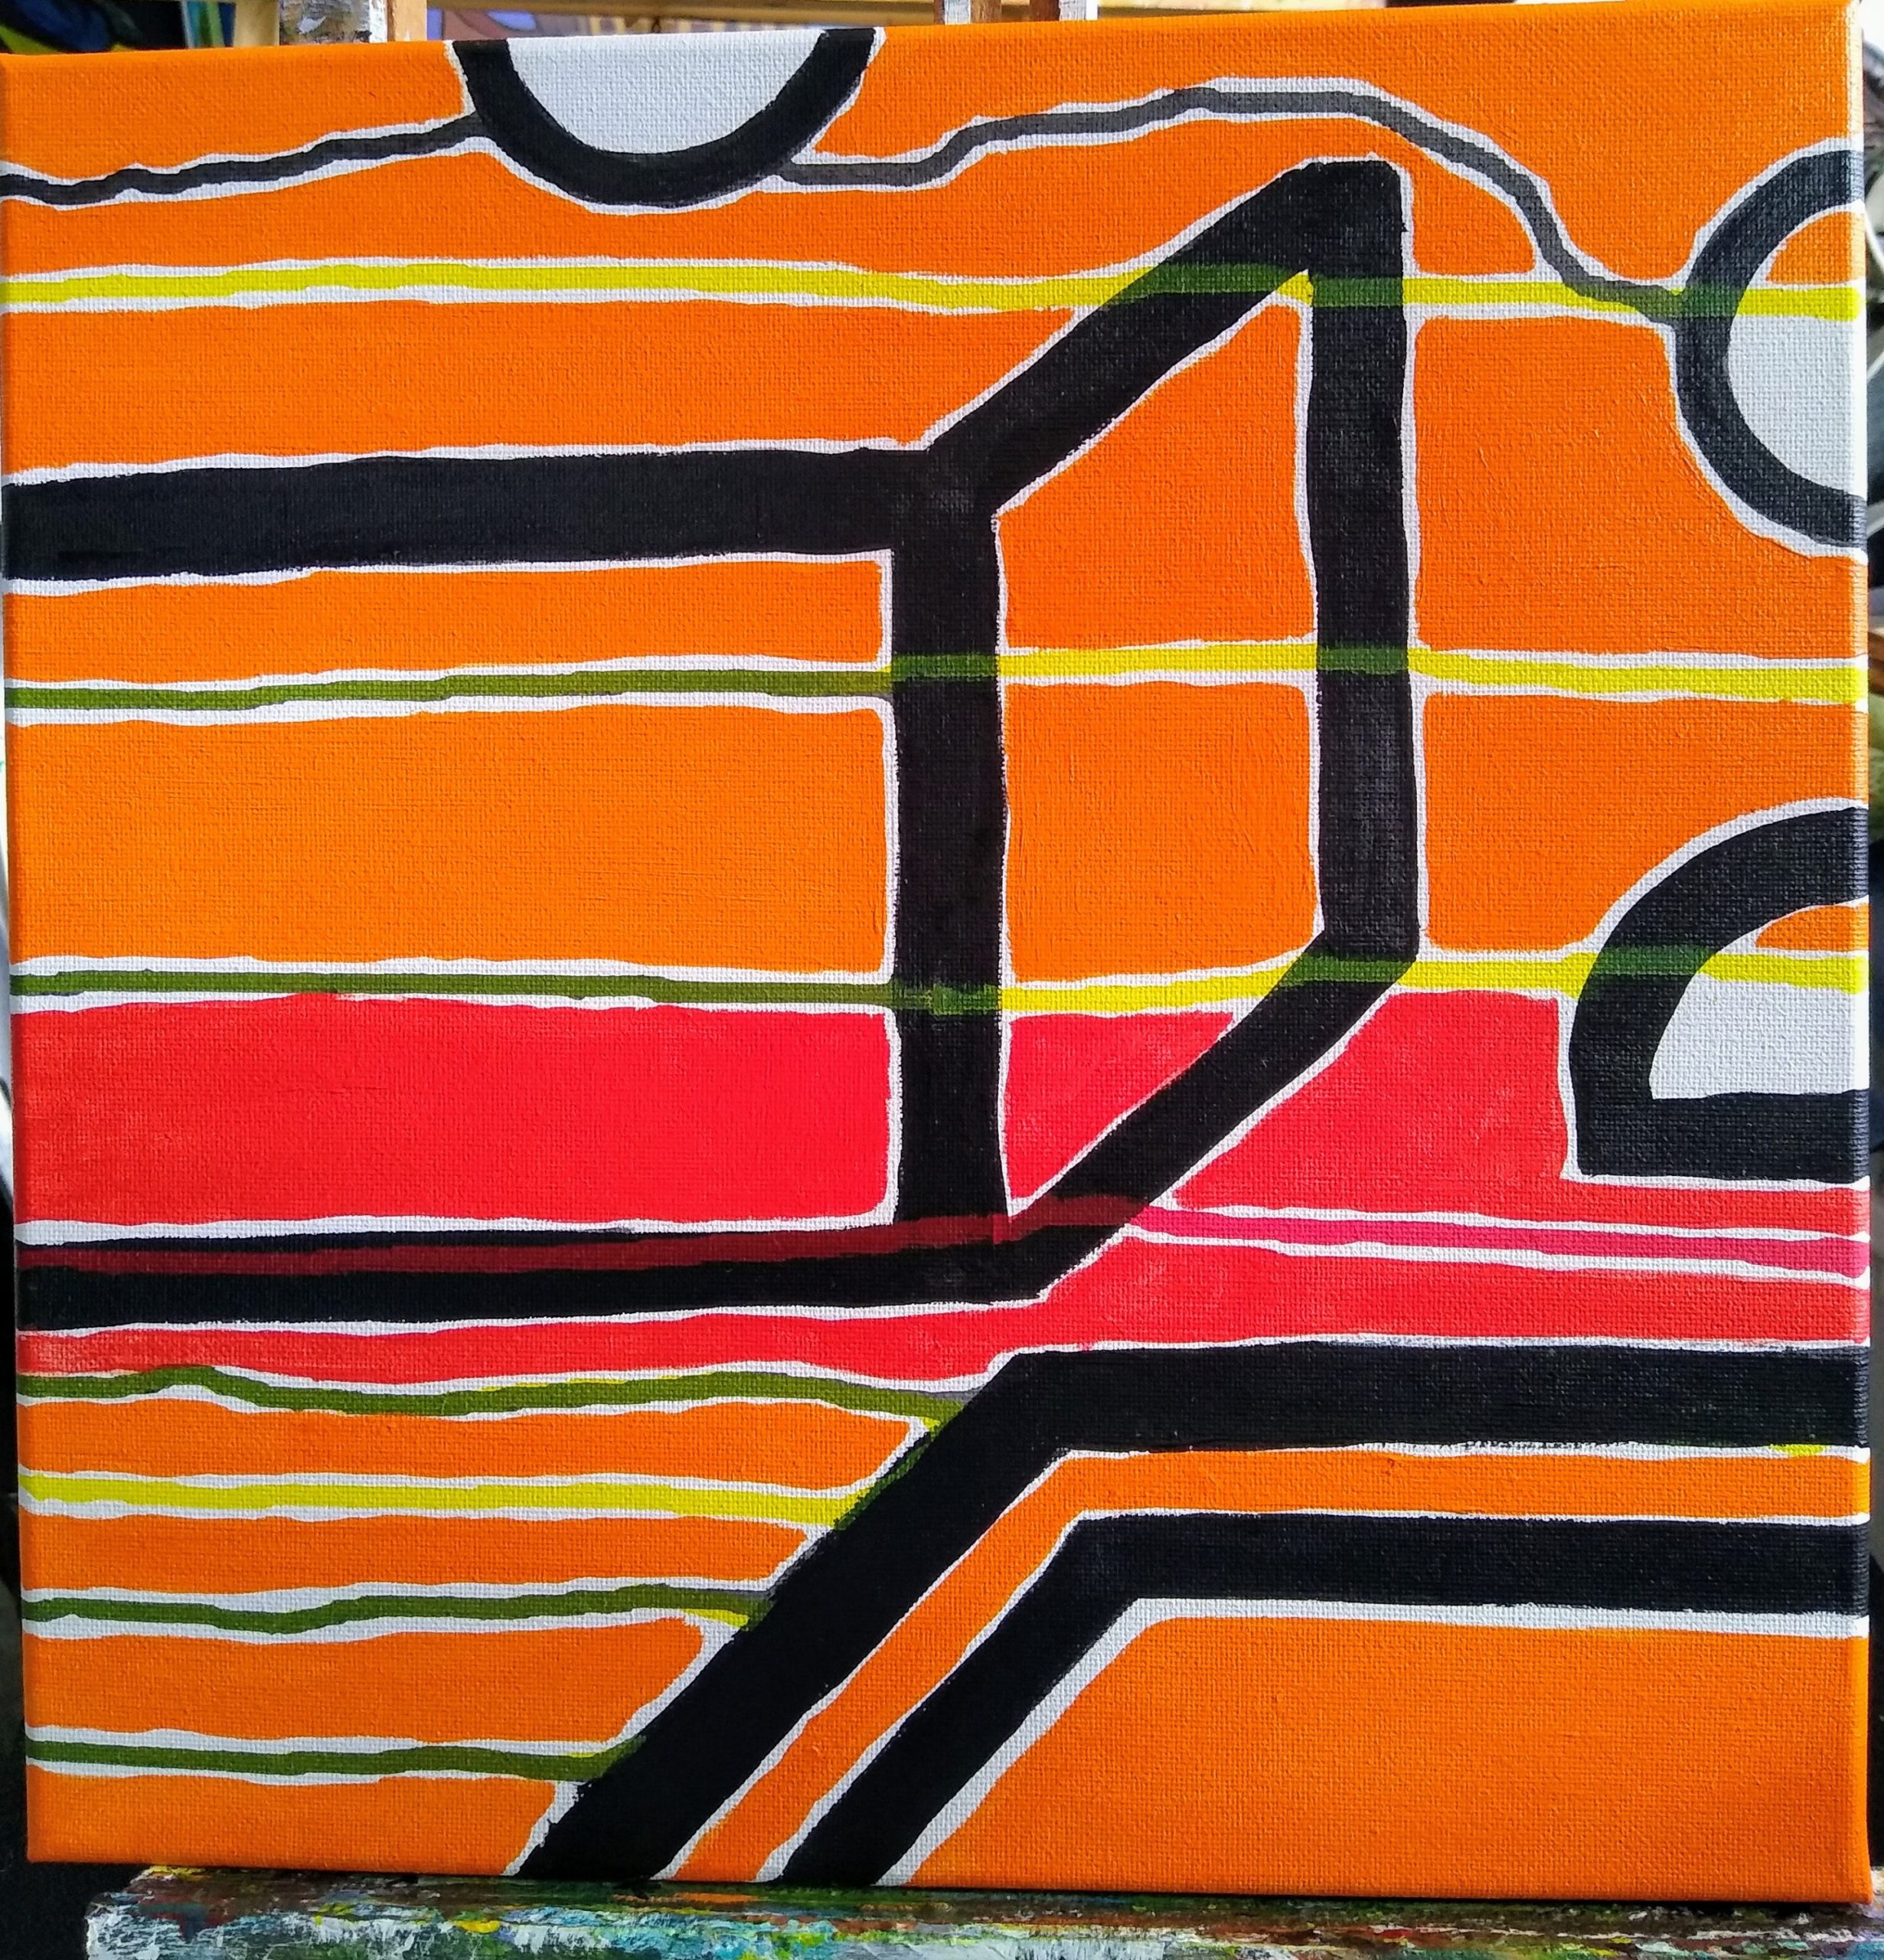 abstract orange painting with black lines by Oscar Will